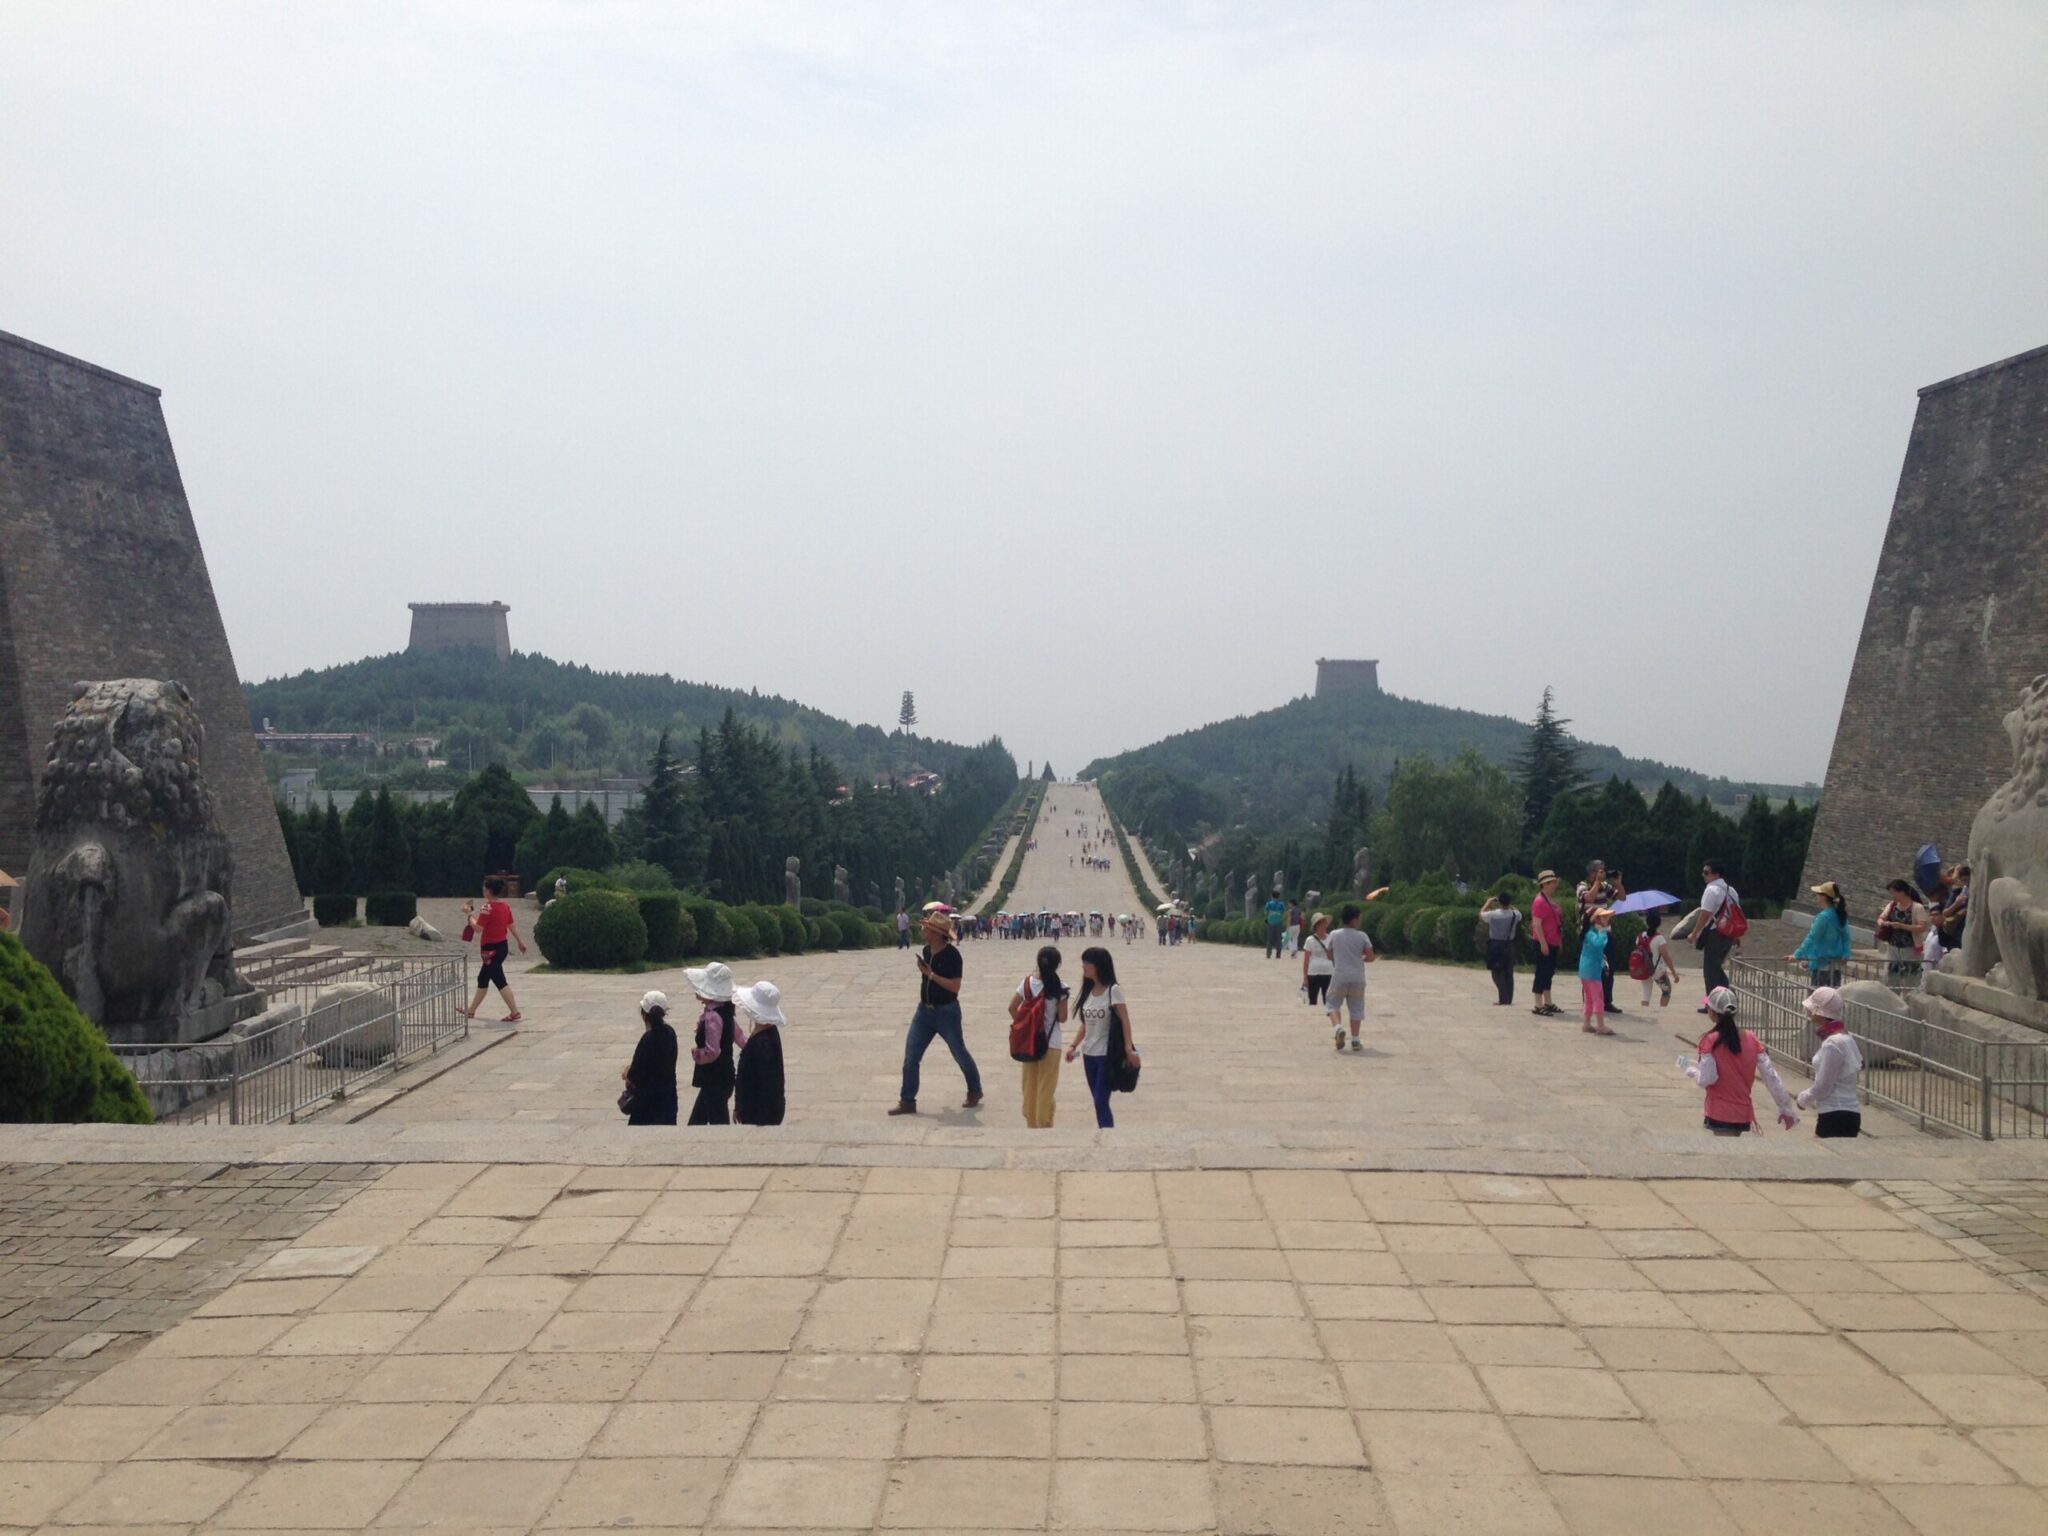 which chinese emperor was buried under mount li soon scaled